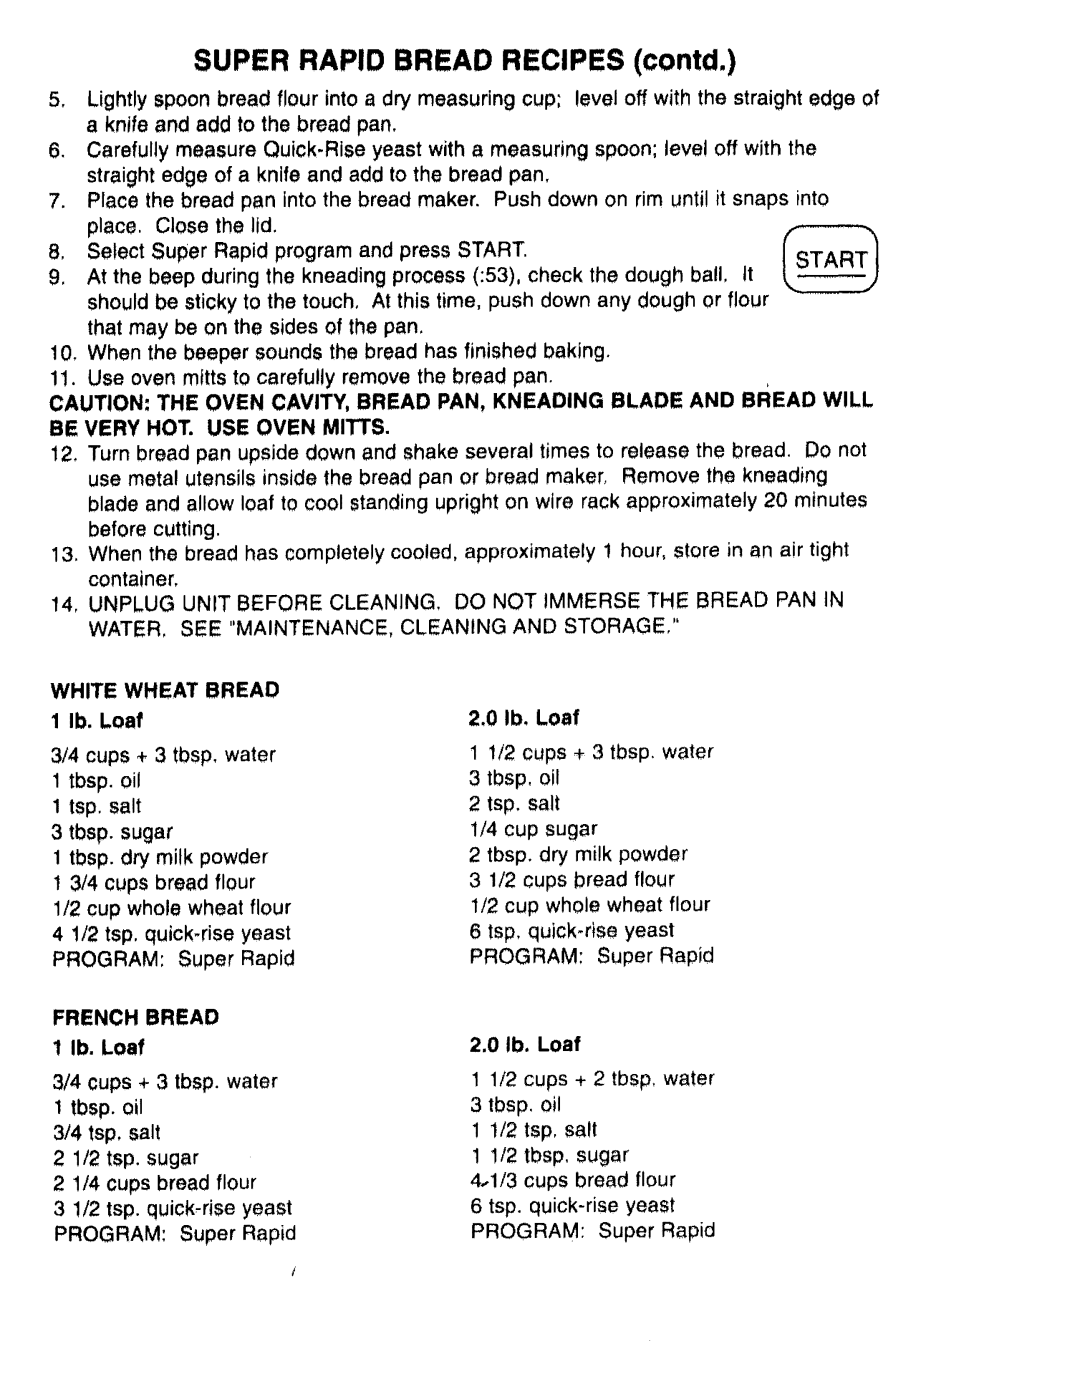 Kenmore 48487 SUPER RAPID BREAD RECIPES contd, Be Very Hot. Use Oven Mitts, WHITE WHEAT BREAD 1 lb. Loaf, 2.0 Ib, Loaf 